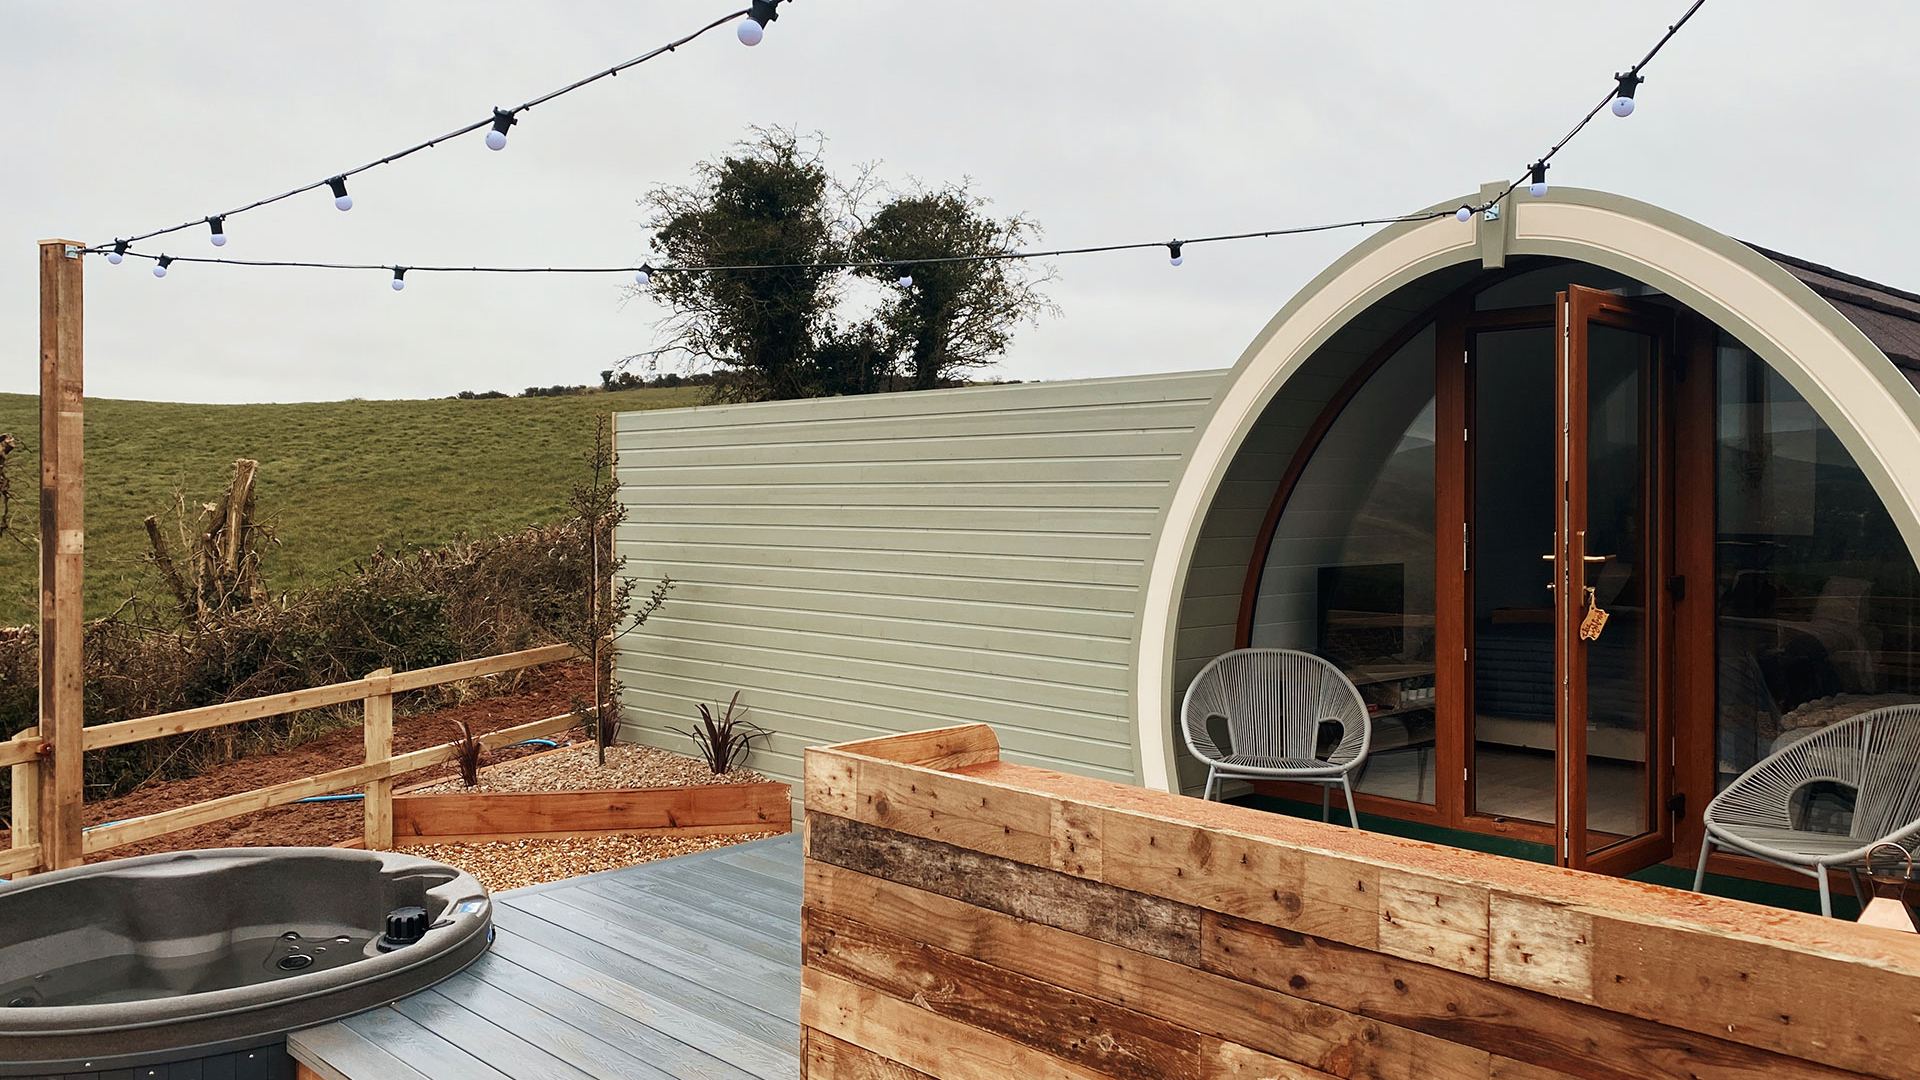 View of the glamping pod at Streamvale farm